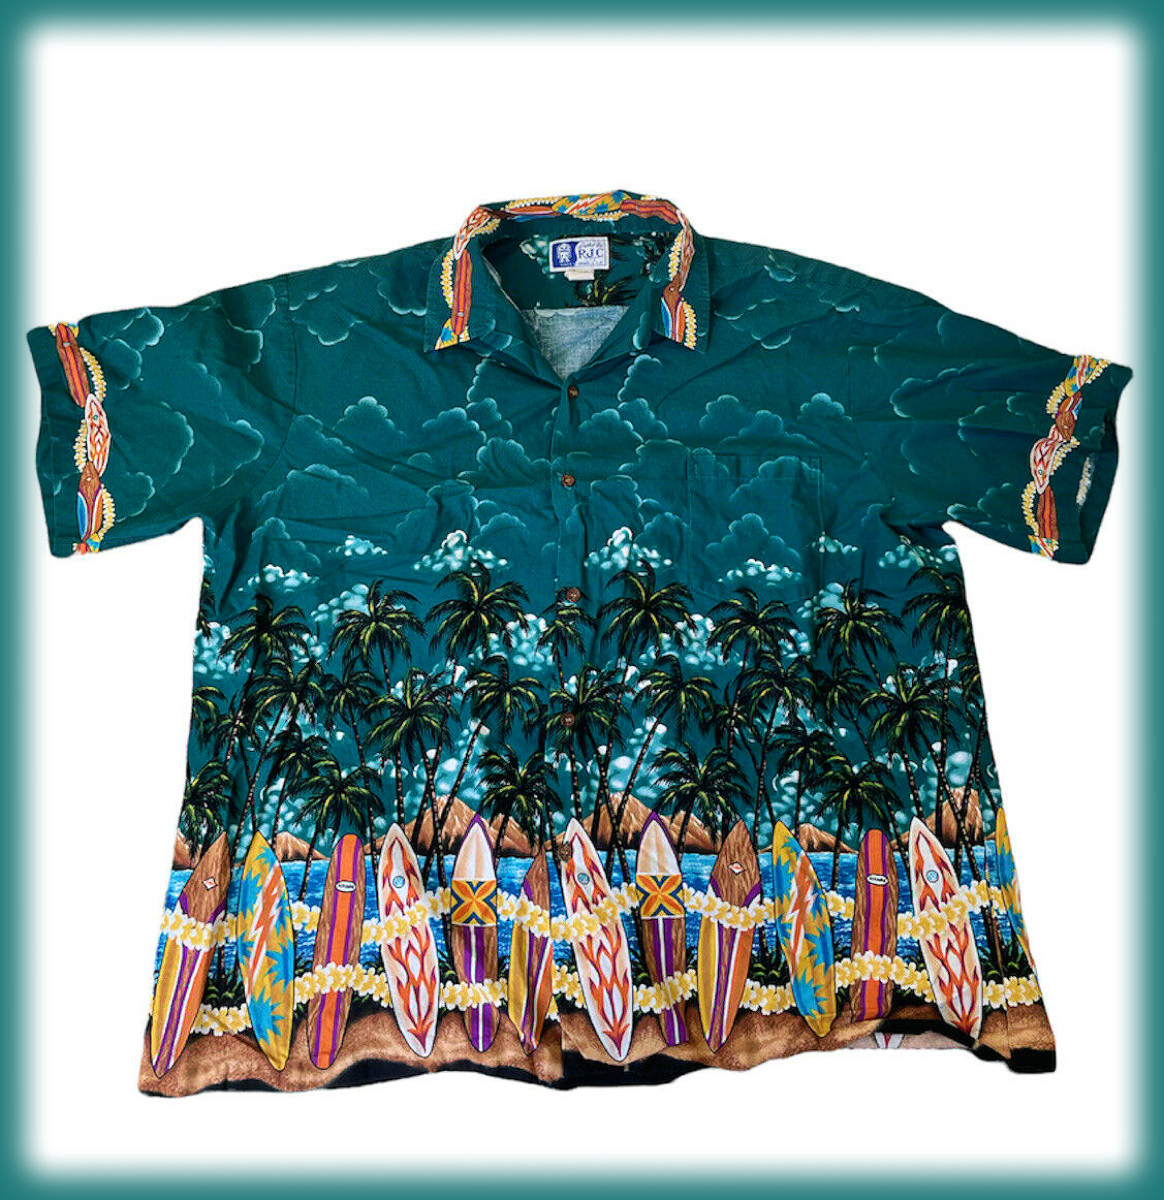 Styled By RJC Men's 3XL Hawaiian Cotton Shirt Palm Trees Ocean Made in Hawaii USA, Surf Board, Palm Trees.